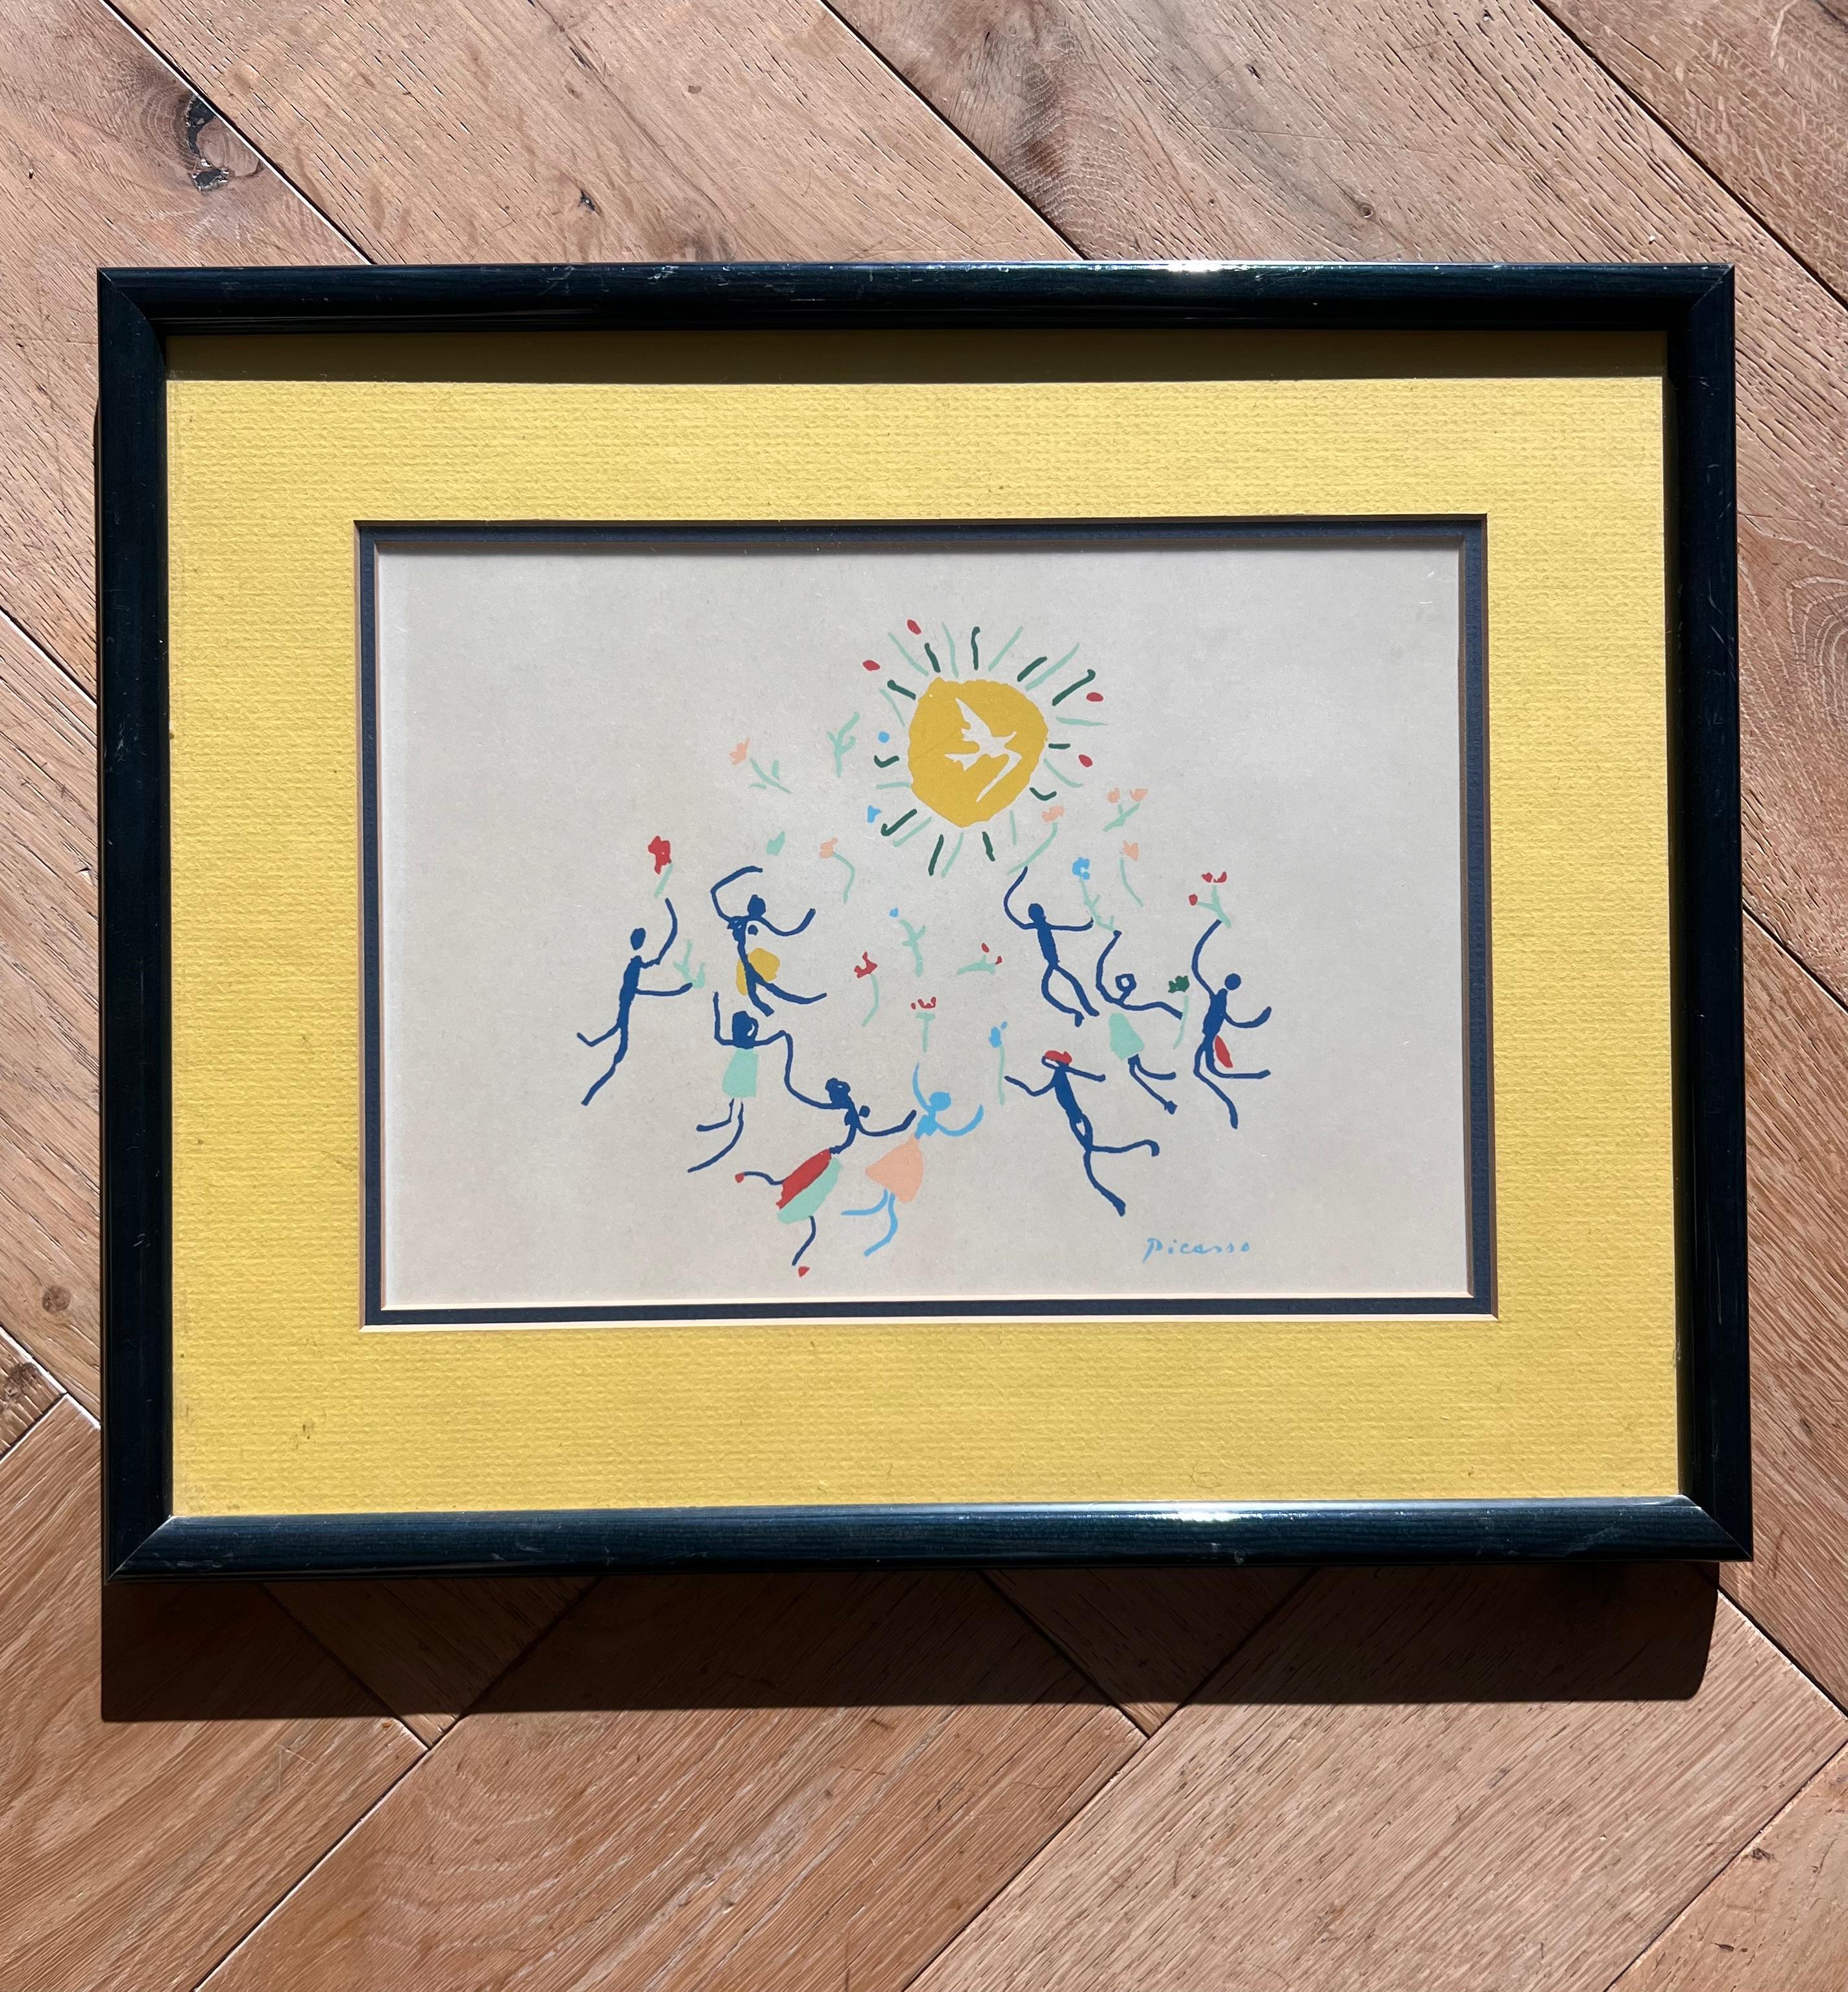 A mid century framed lithograph print of Pablo Picasso’s “Homage to the Sun”, 20th century. With midnight blue and canary yellow matting and behind glass in a deep forest green lacquered frame. Ready to hang. Pick up in central west Los Angeles or